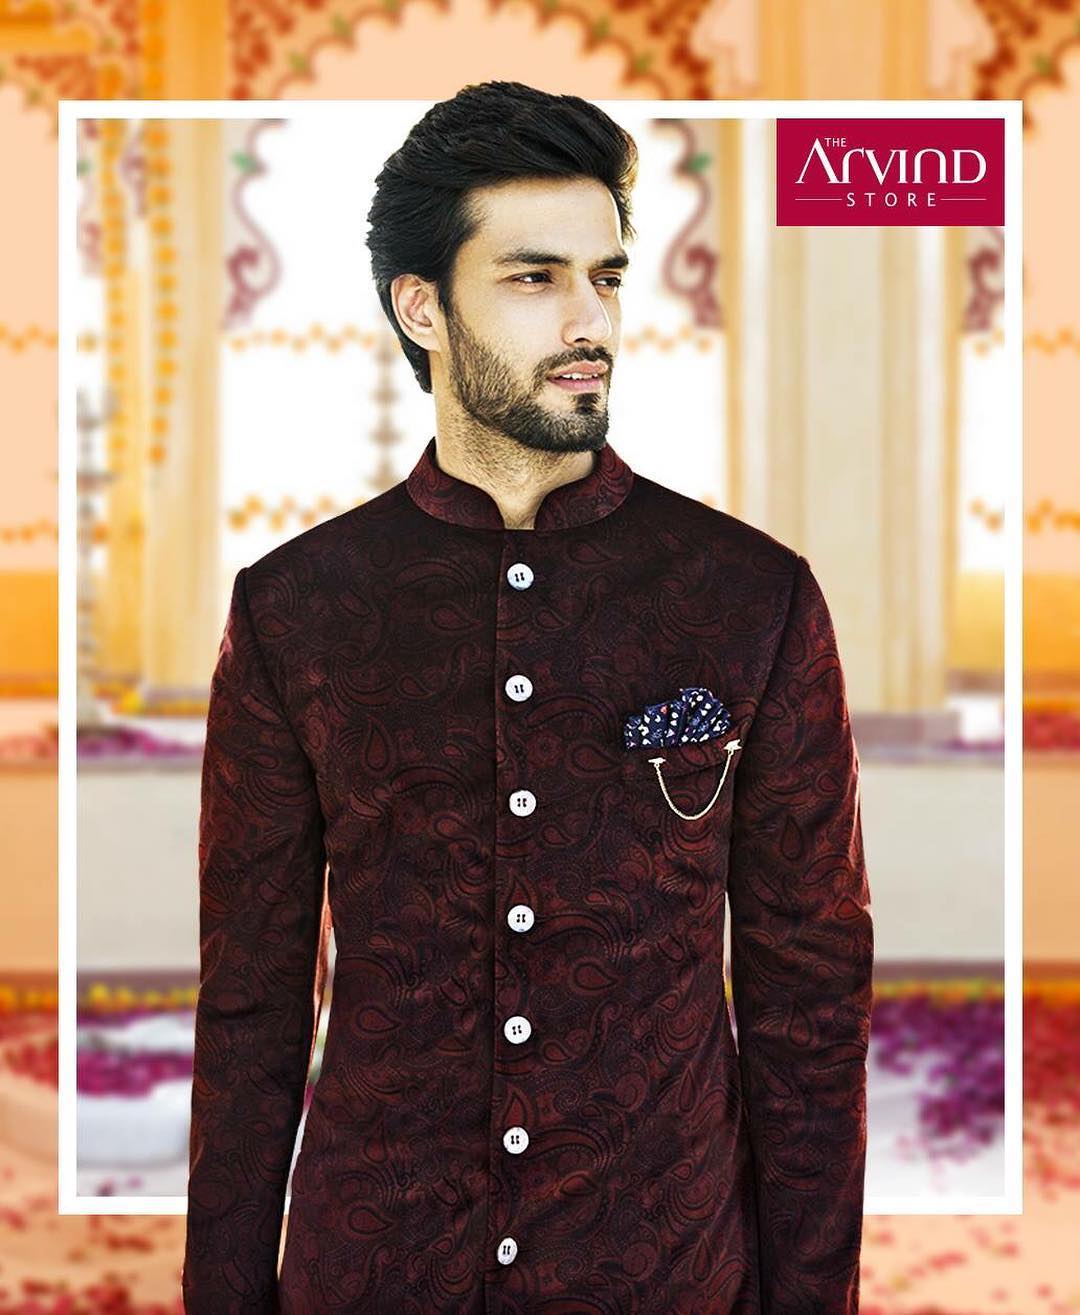 Embrace the spirit of an exuberant celebration and look refined by donning this outfit from our latest Ceremonial Collection. Visit our stores today - Link in Bio

#celebrationwear #weddingwear #suits #royal #weddingsuits #bestdressed #menswear #handcrafted #groomsuit #designersuits #exclusive